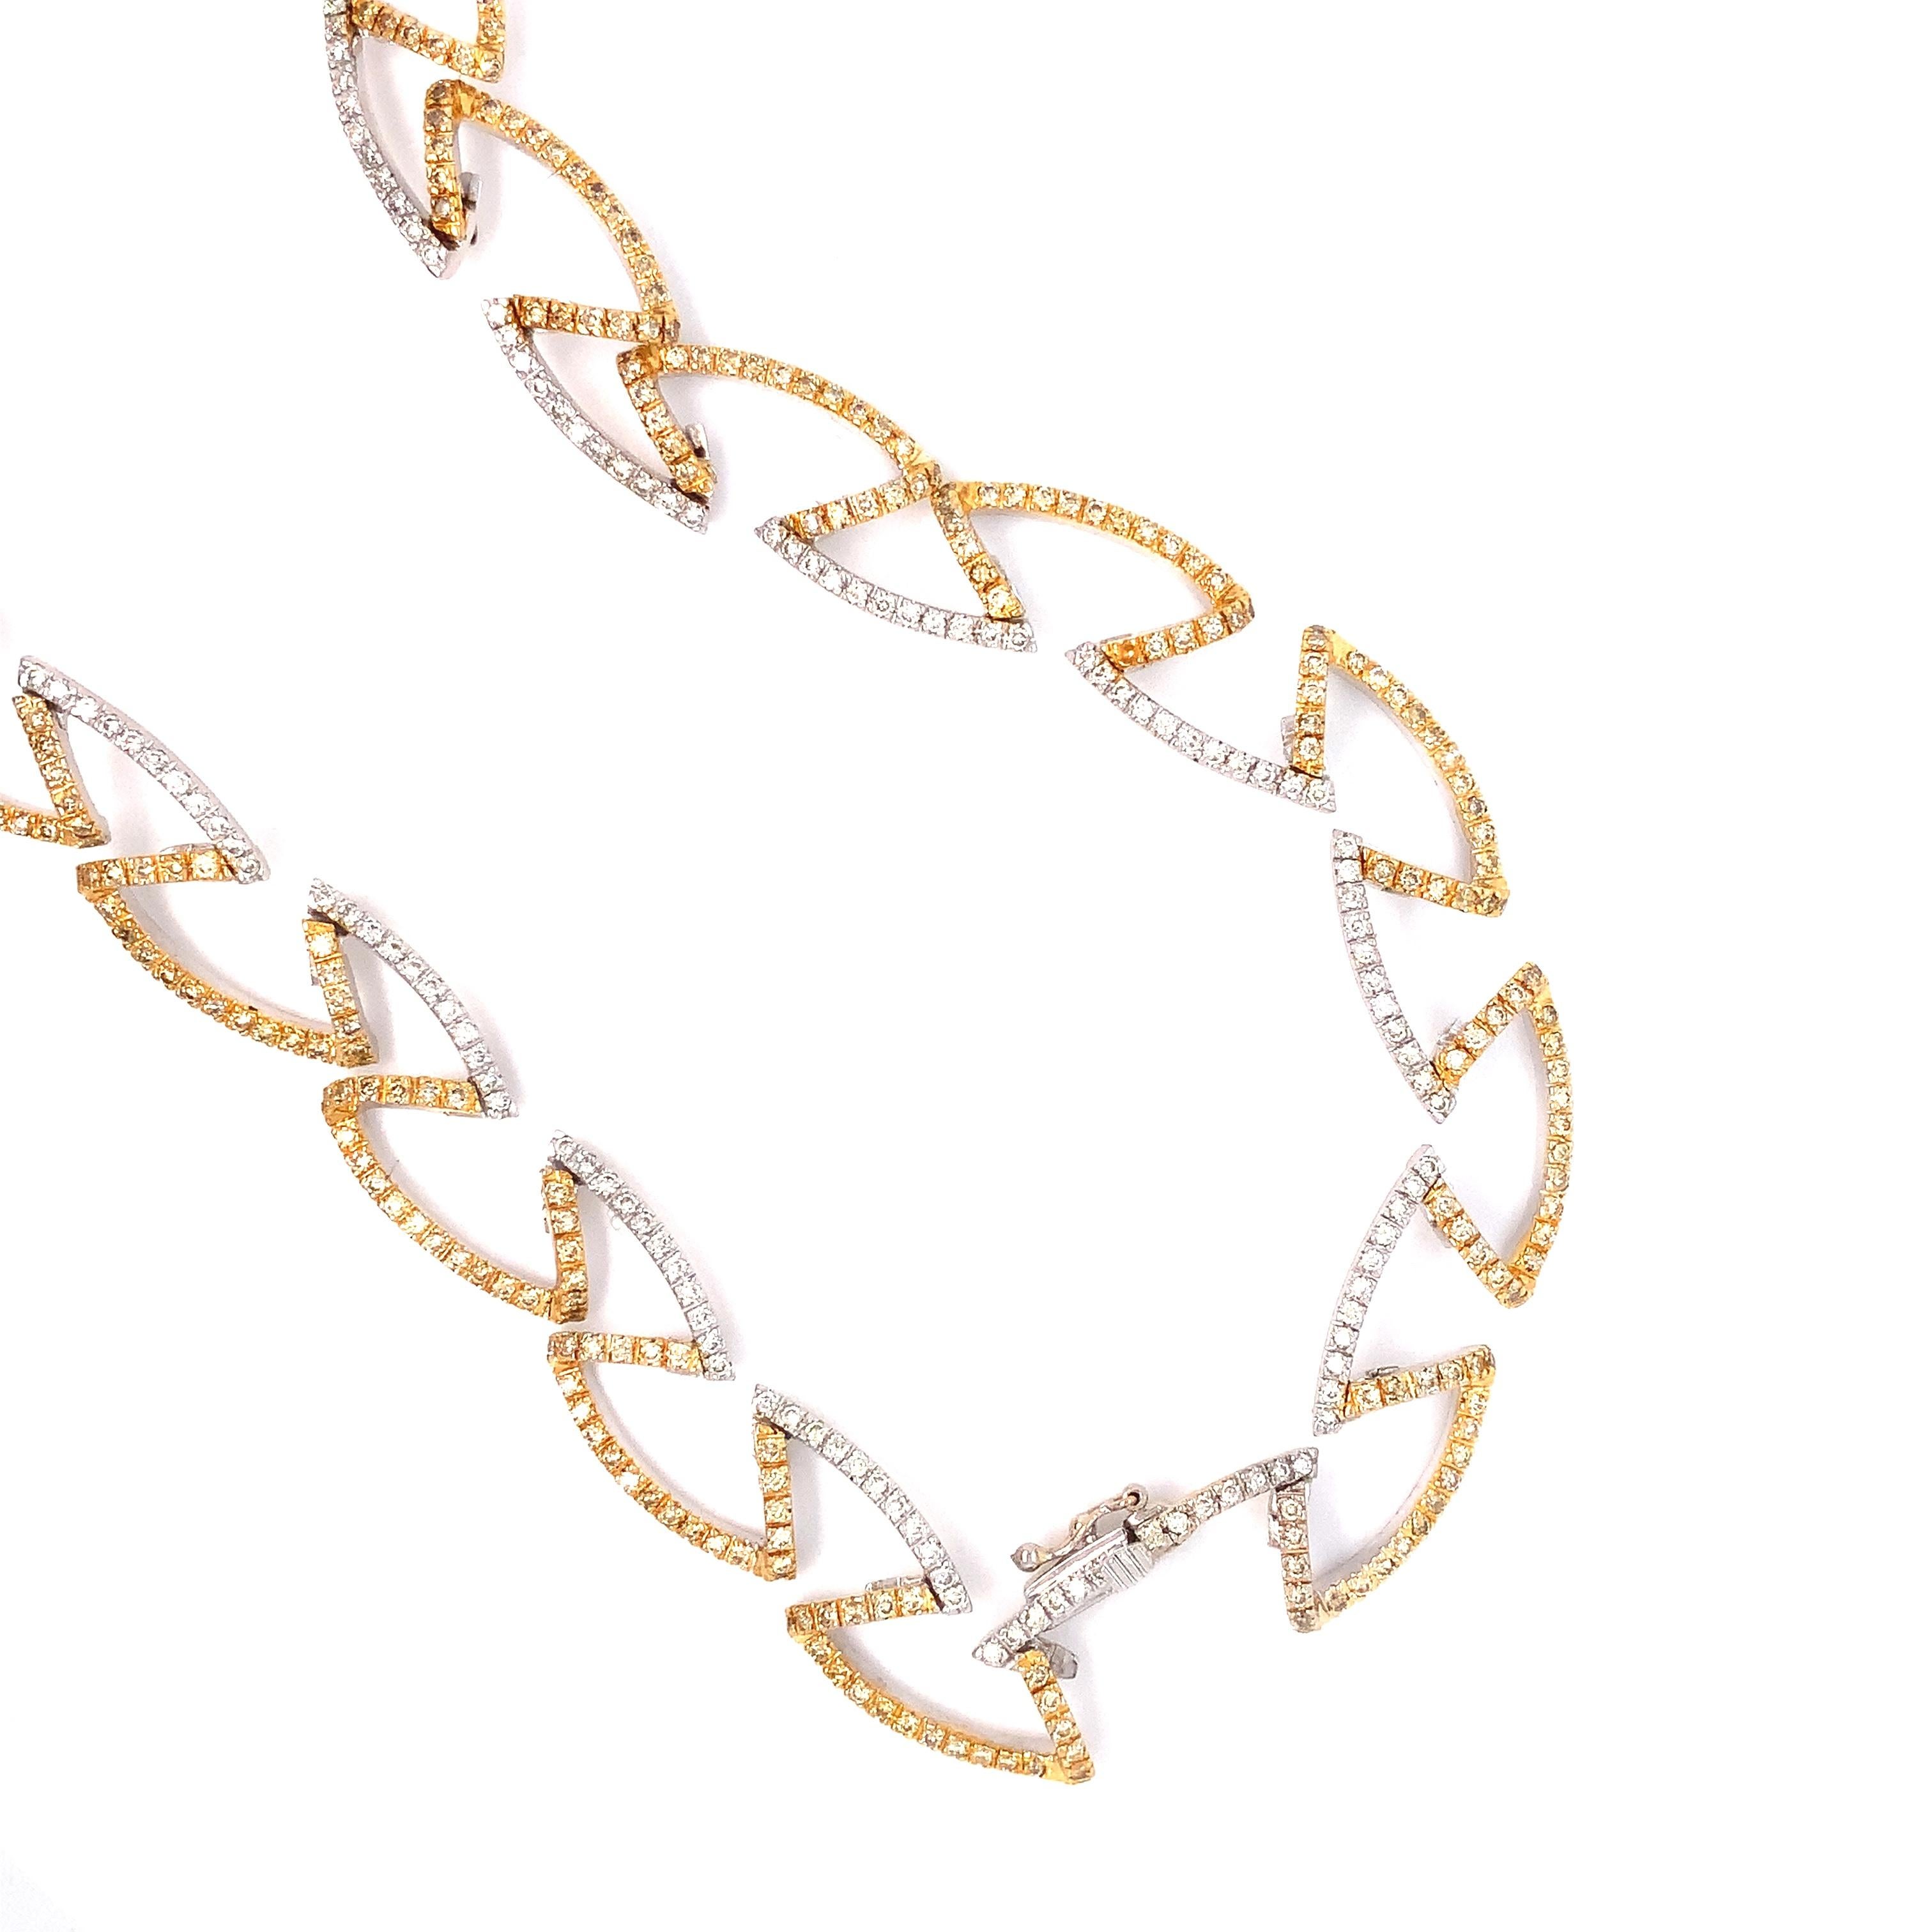 Brilliant Cut White and Fancy Yellow Diamond Choker Necklace Set in 18 Karat White Gold For Sale